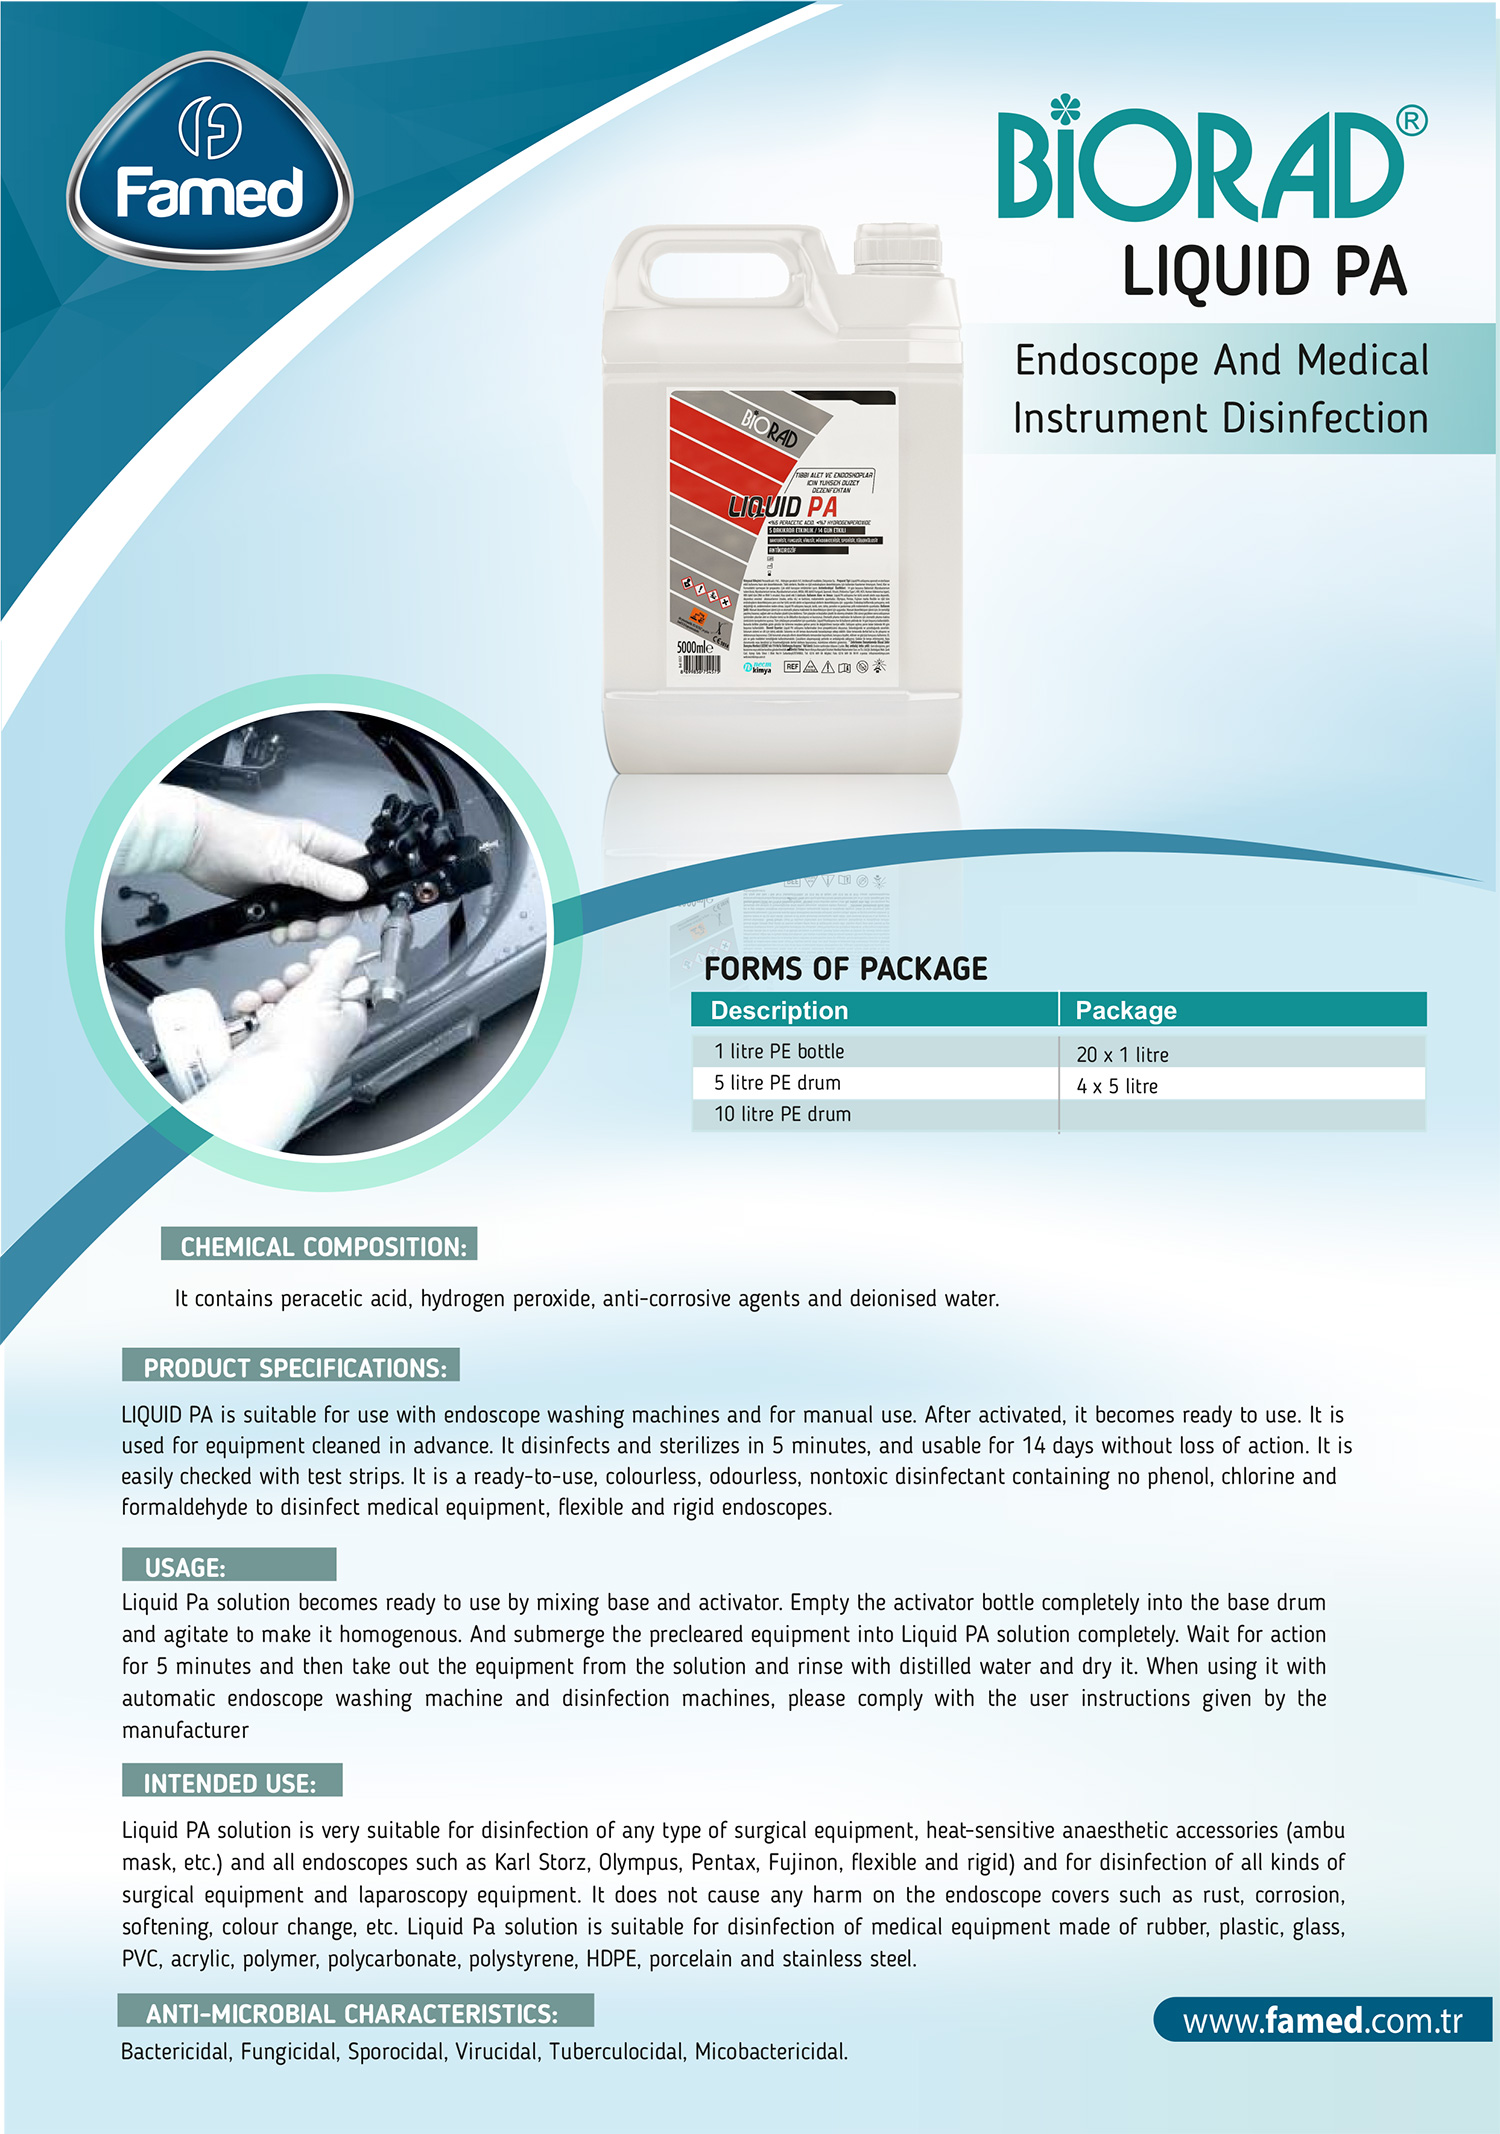 Liquid PA Endoscope And Medical Instrument Disinfection